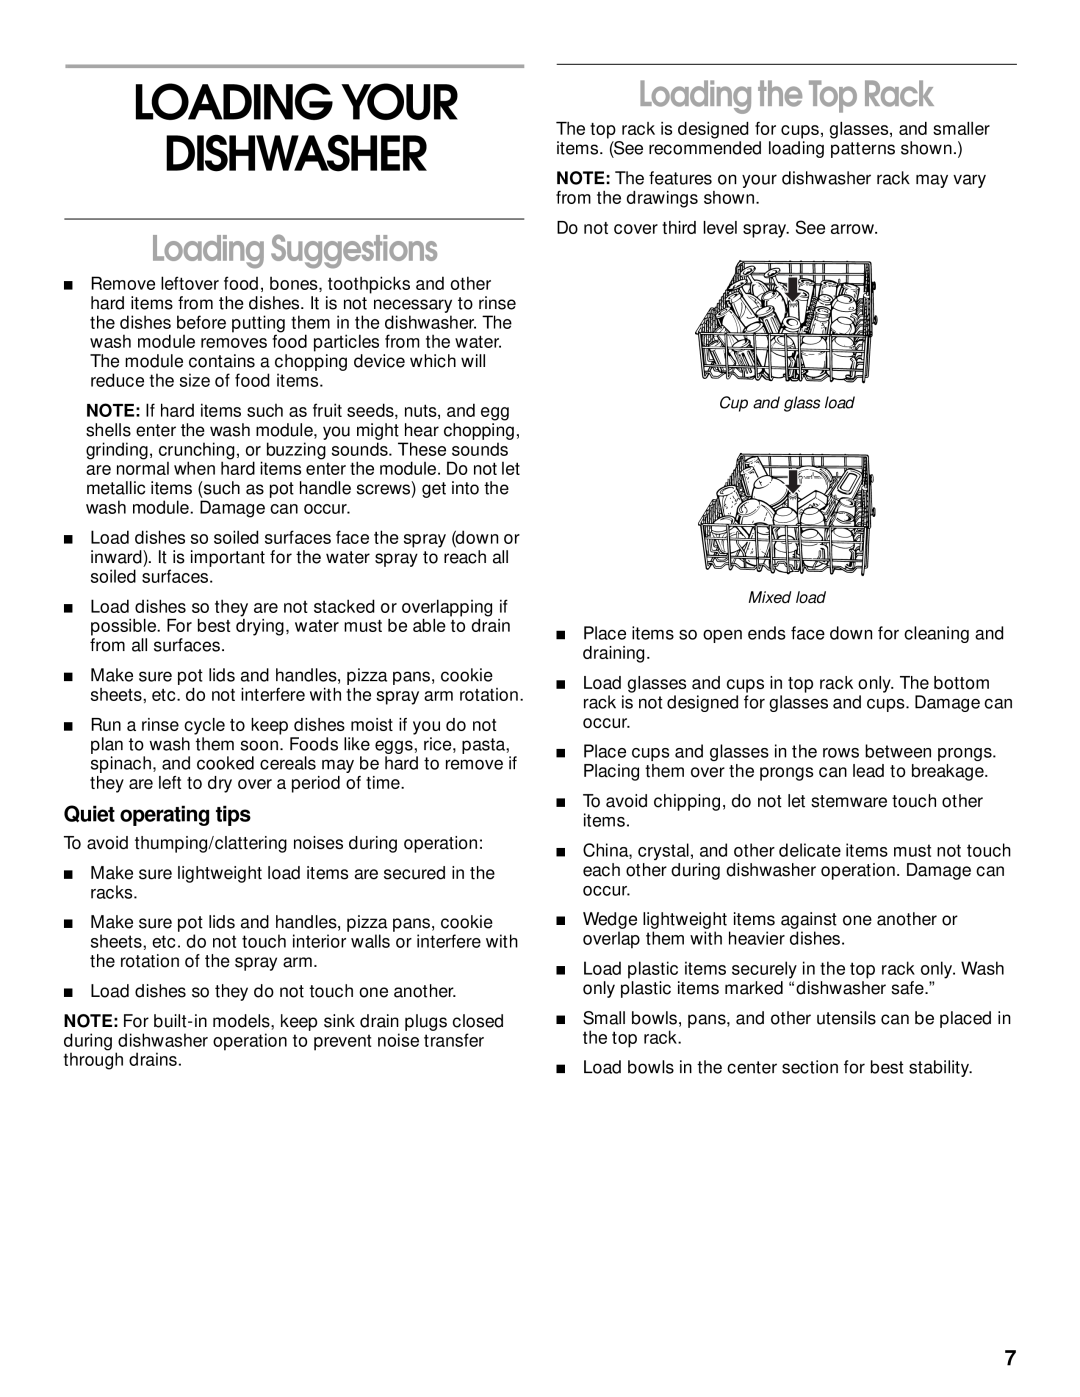 Kirkland Signature 8051560 manual Loading Your Dishwasher, Loading Suggestions, Loading the Top Rack, Quiet operating tips 